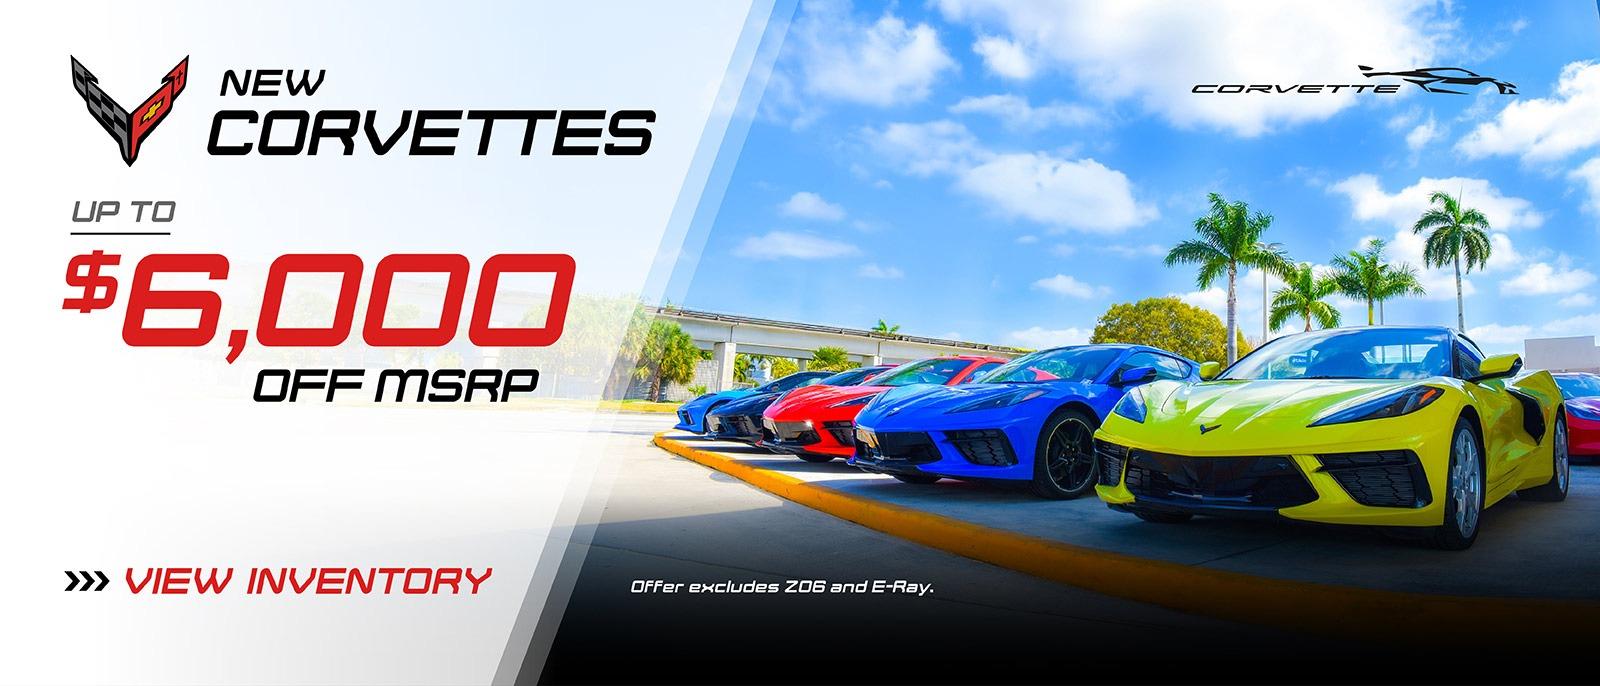 New Corvettes Up to $6000 off MSRP at Bomnin Chevrolet in Miami